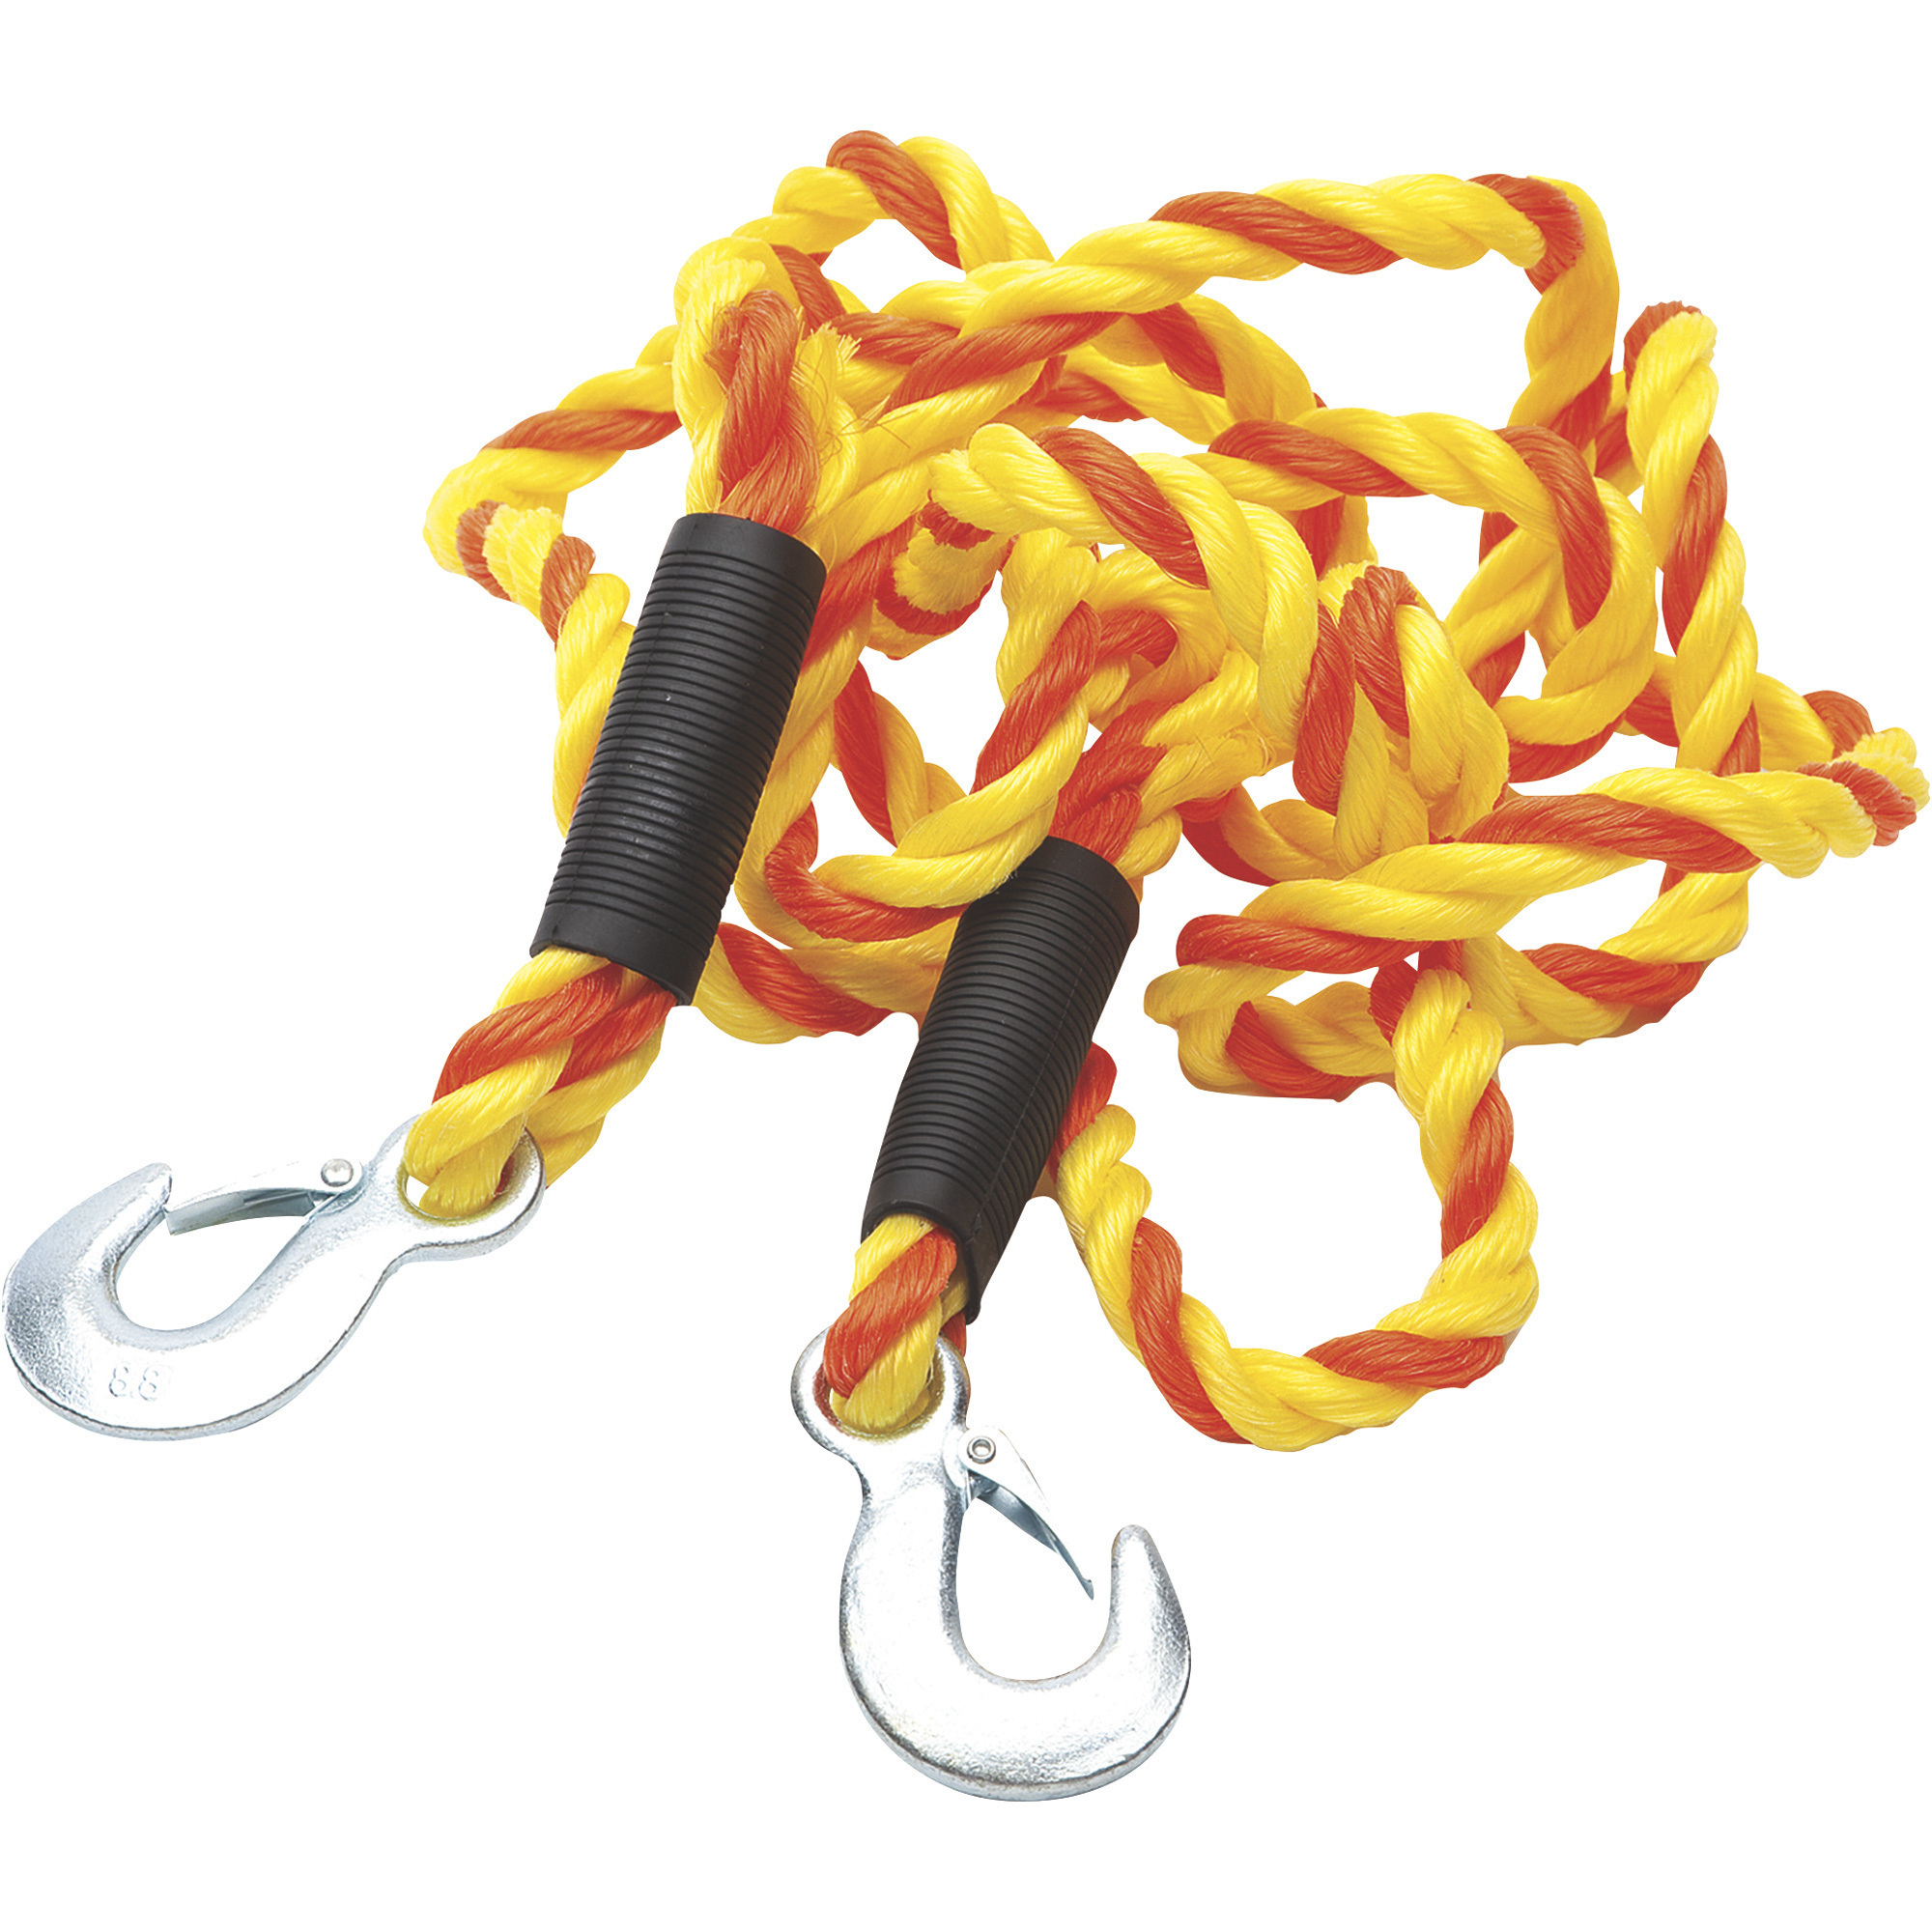 SmartStraps Heavy-Duty Tow Strap with Hooks, 14ft.L, 6,800-Lb. Capacity, Yellow, Model 133